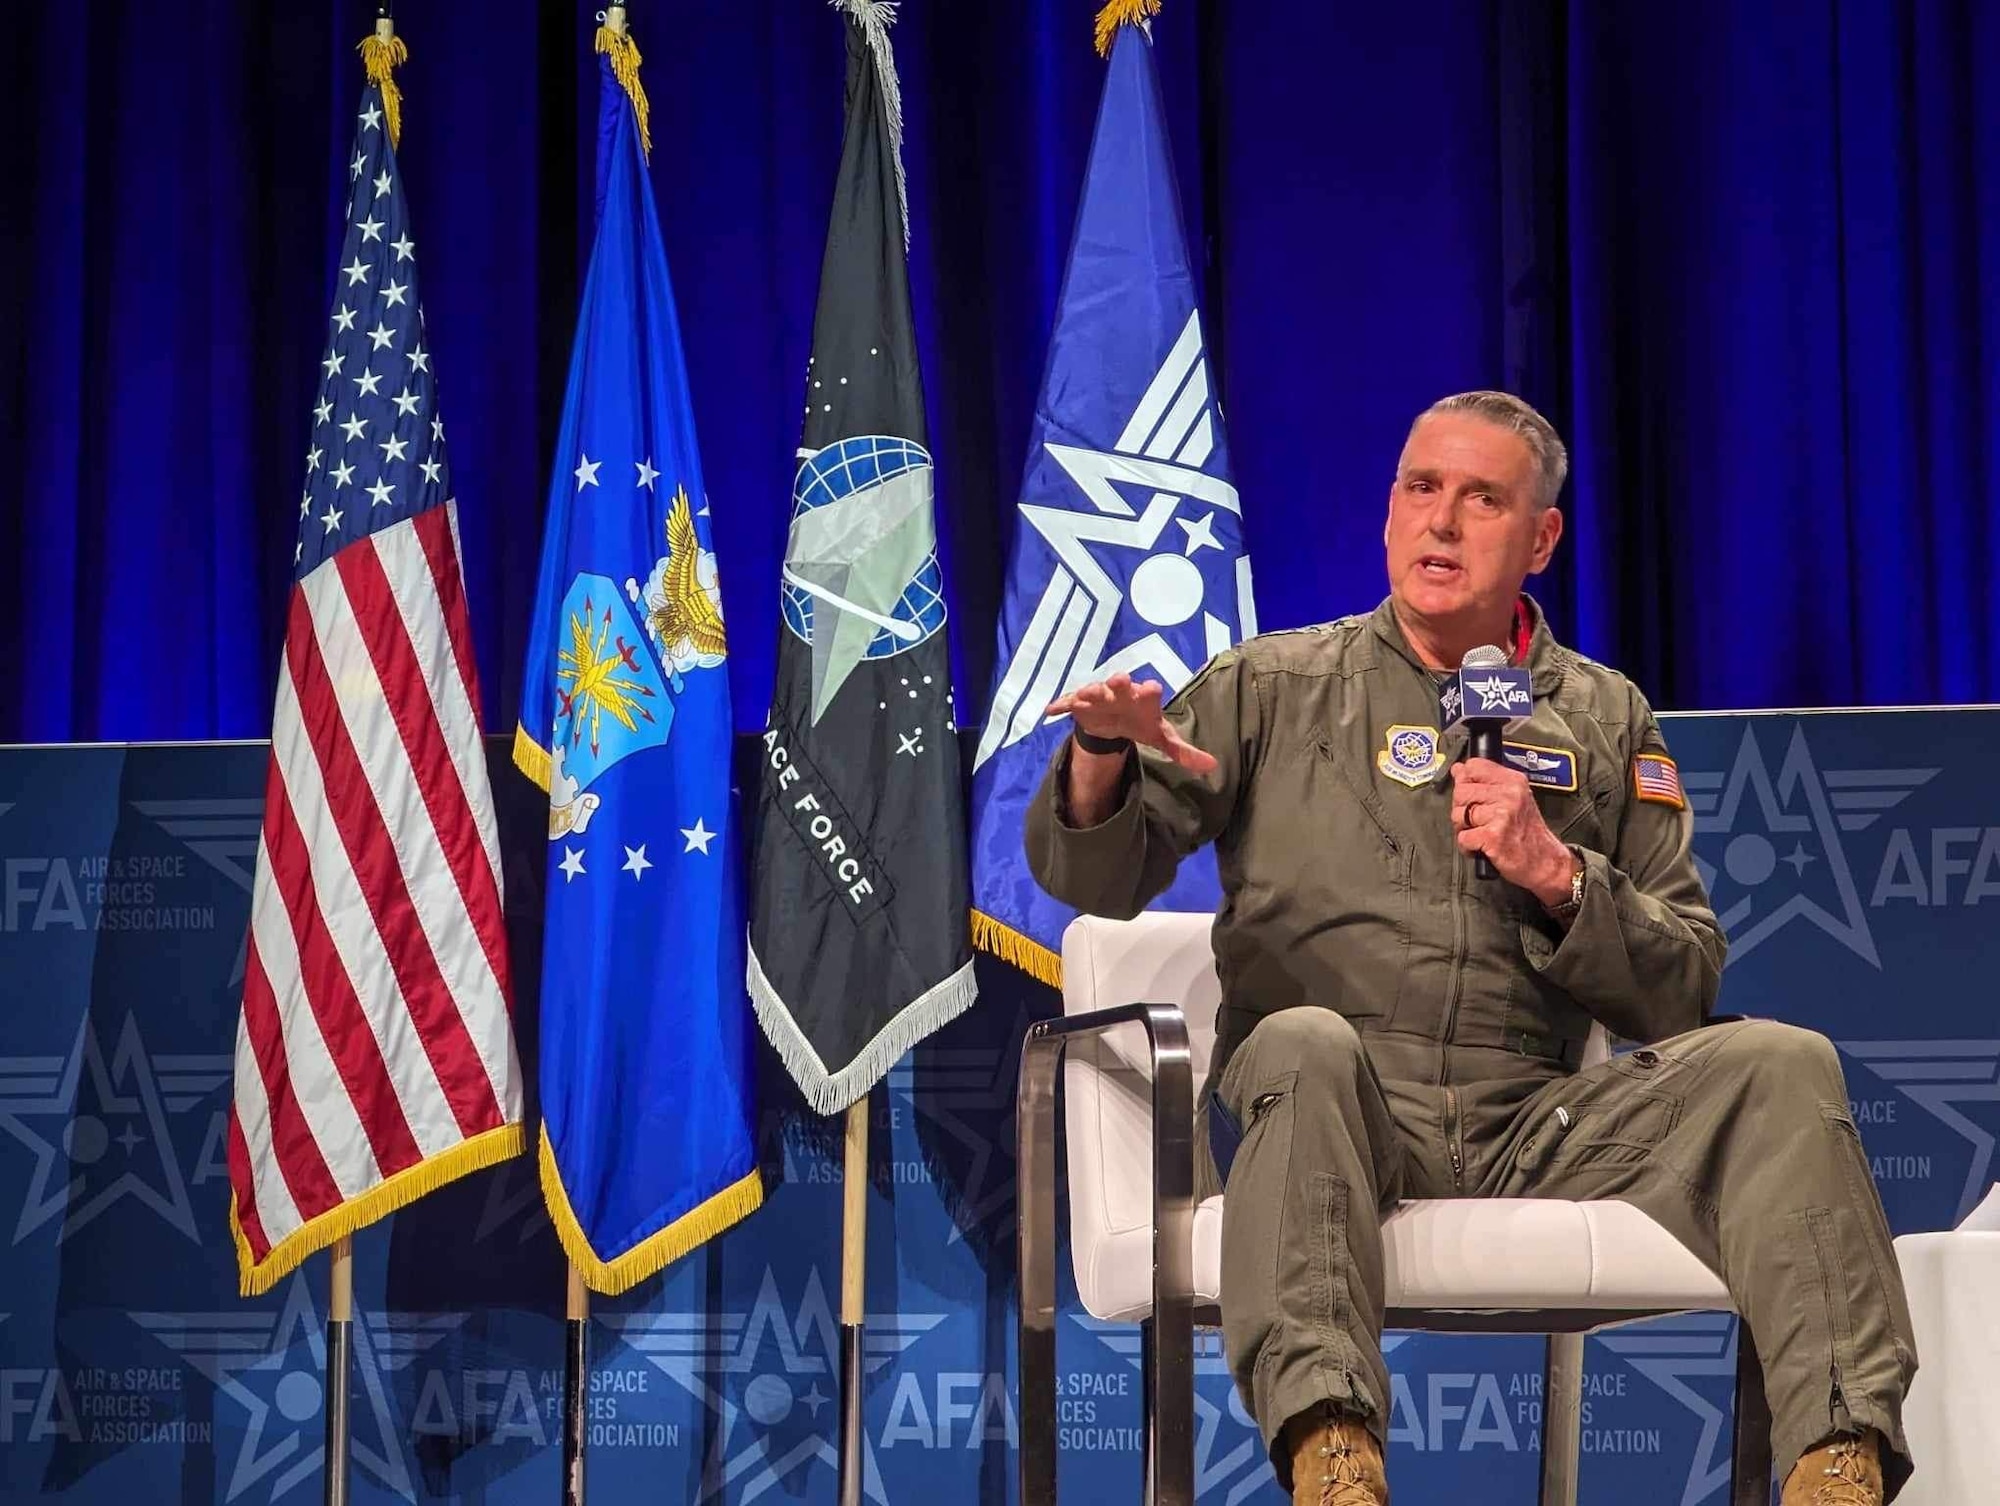 Gen. Mike Minihan, Commander, Air Mobility Command spoke on a panel titled "Rising Intensity of Competition and Conflict" during the Air and Space Force Association Warfare Symposium, Feb. 13, 2024. Gen. James Hecker, Commander, U.S. Air Forces in Europe, Gen. Mark Kelly, Commander, Air Combat Command, and Gen. Kevin Schneider, Commander, Pacific Air Forces, also participated in the discussion.